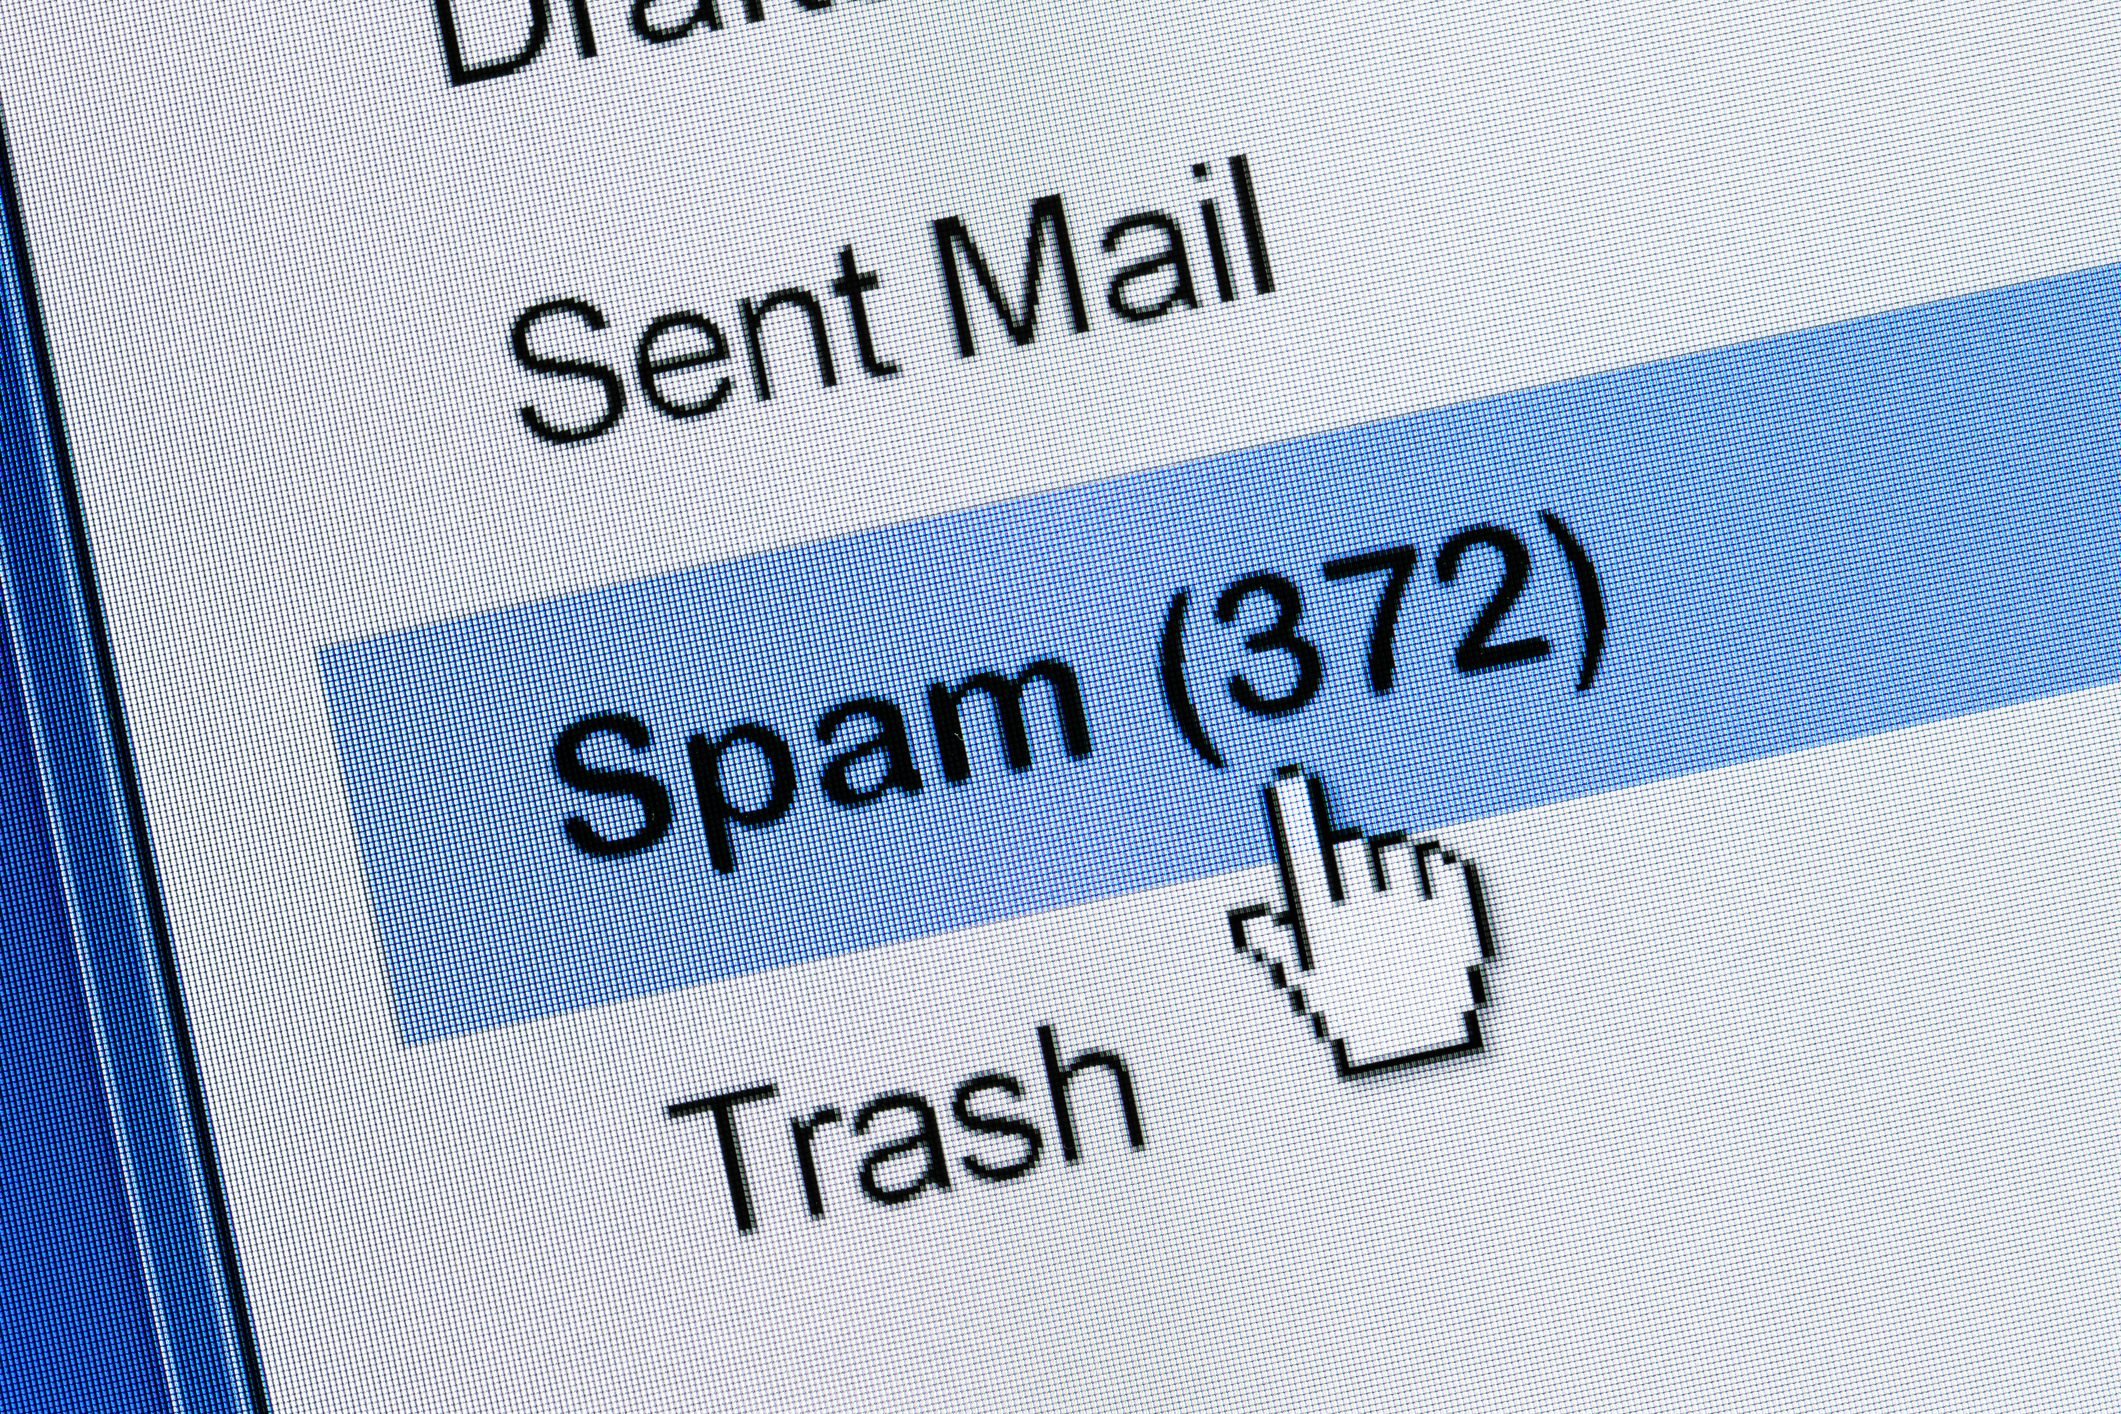 How To Check Your Spam Folder In Gmail and Outlook